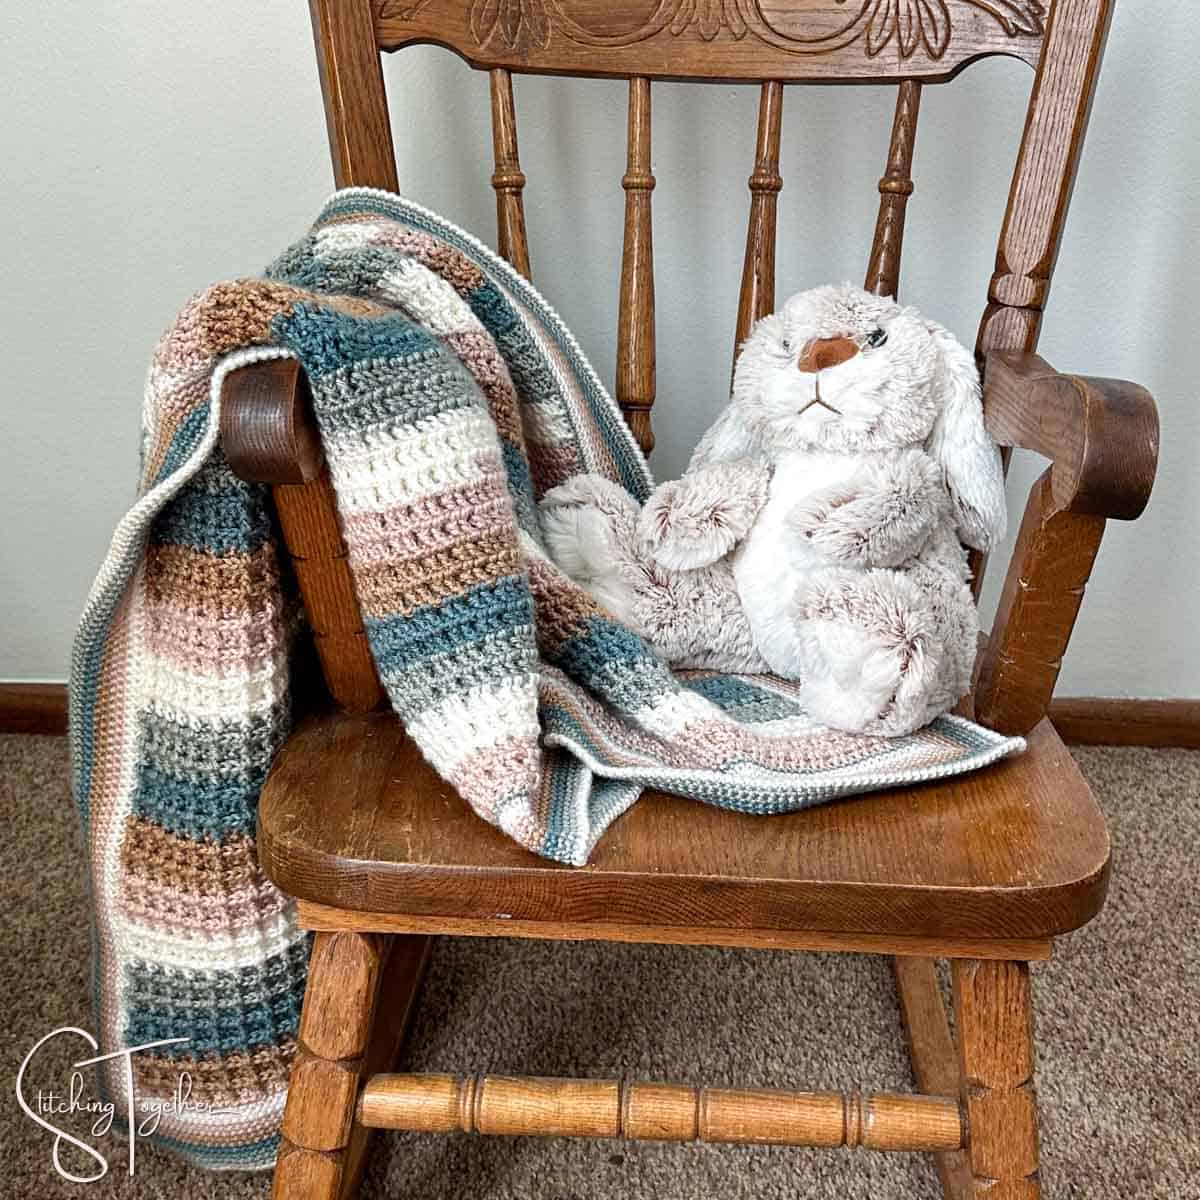 close up of a stuffed rabbit and a striped waffle stitch crochet baby blanket